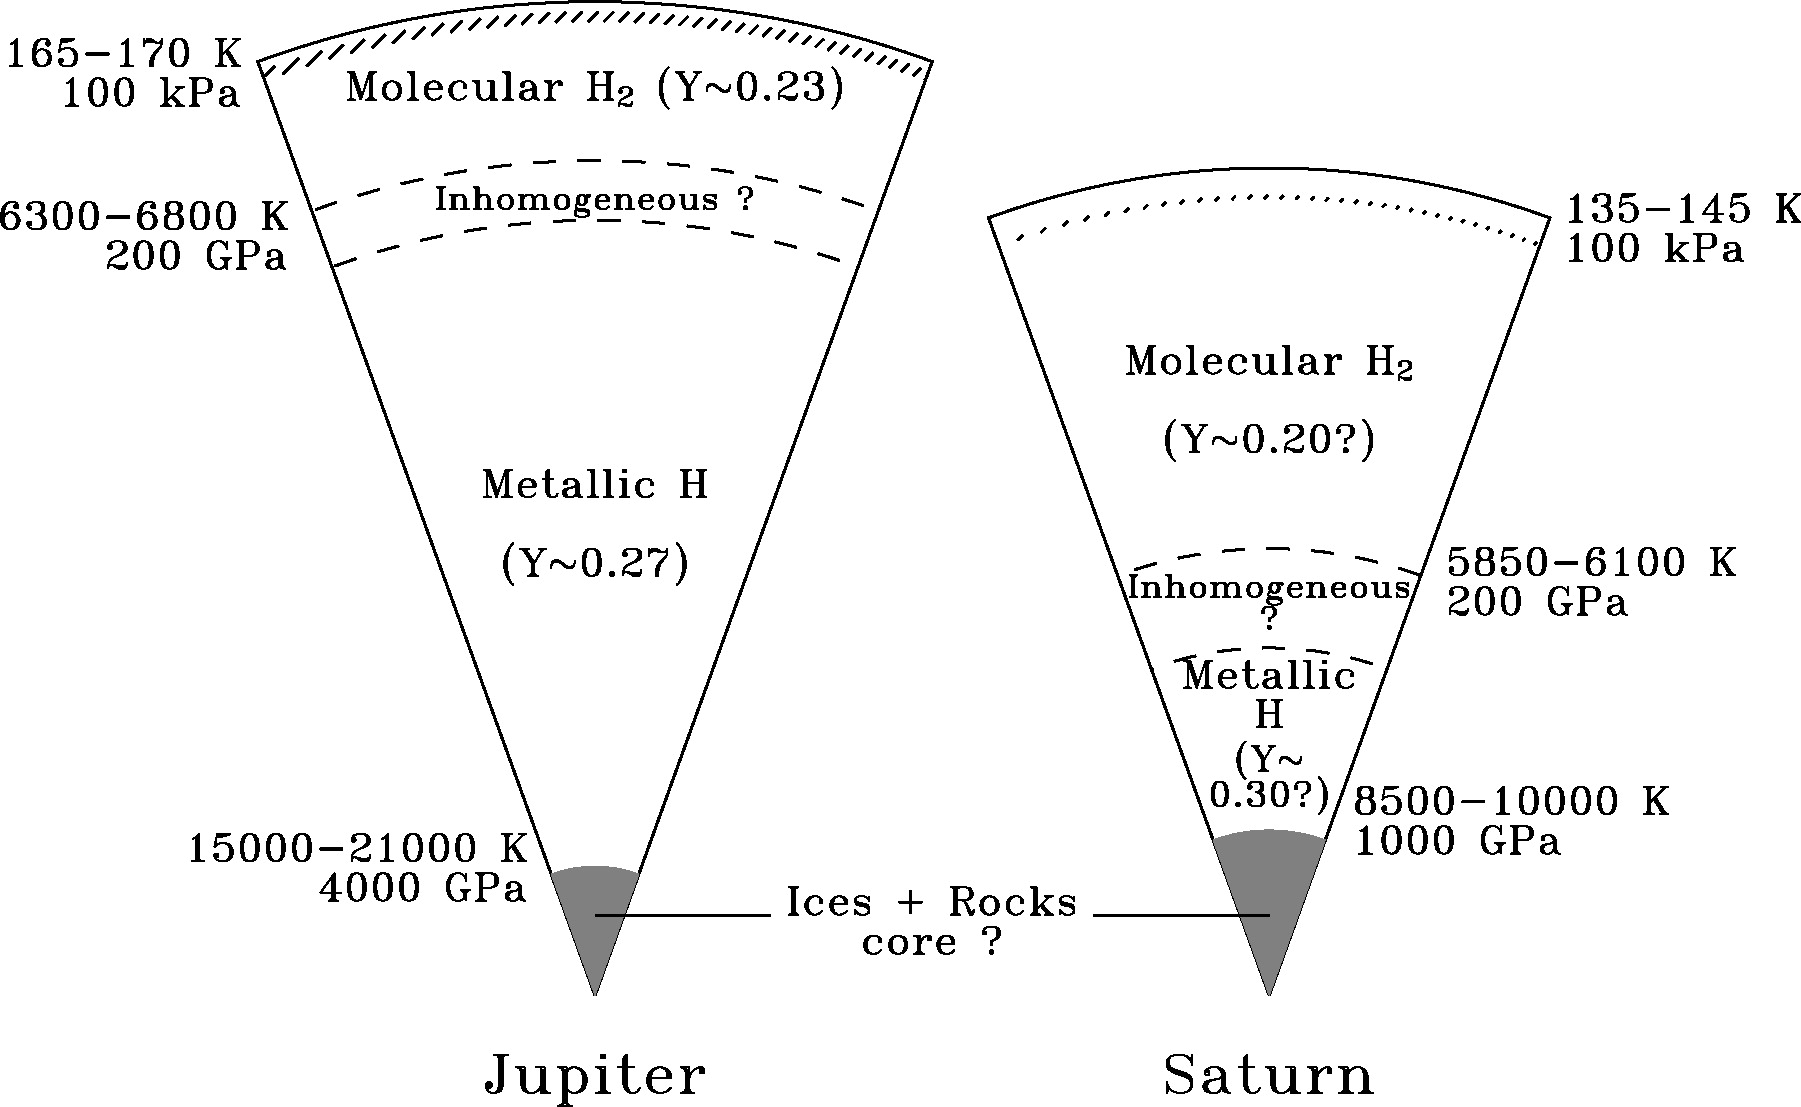 Schematic representation of the interiors of Jupiter and Saturn